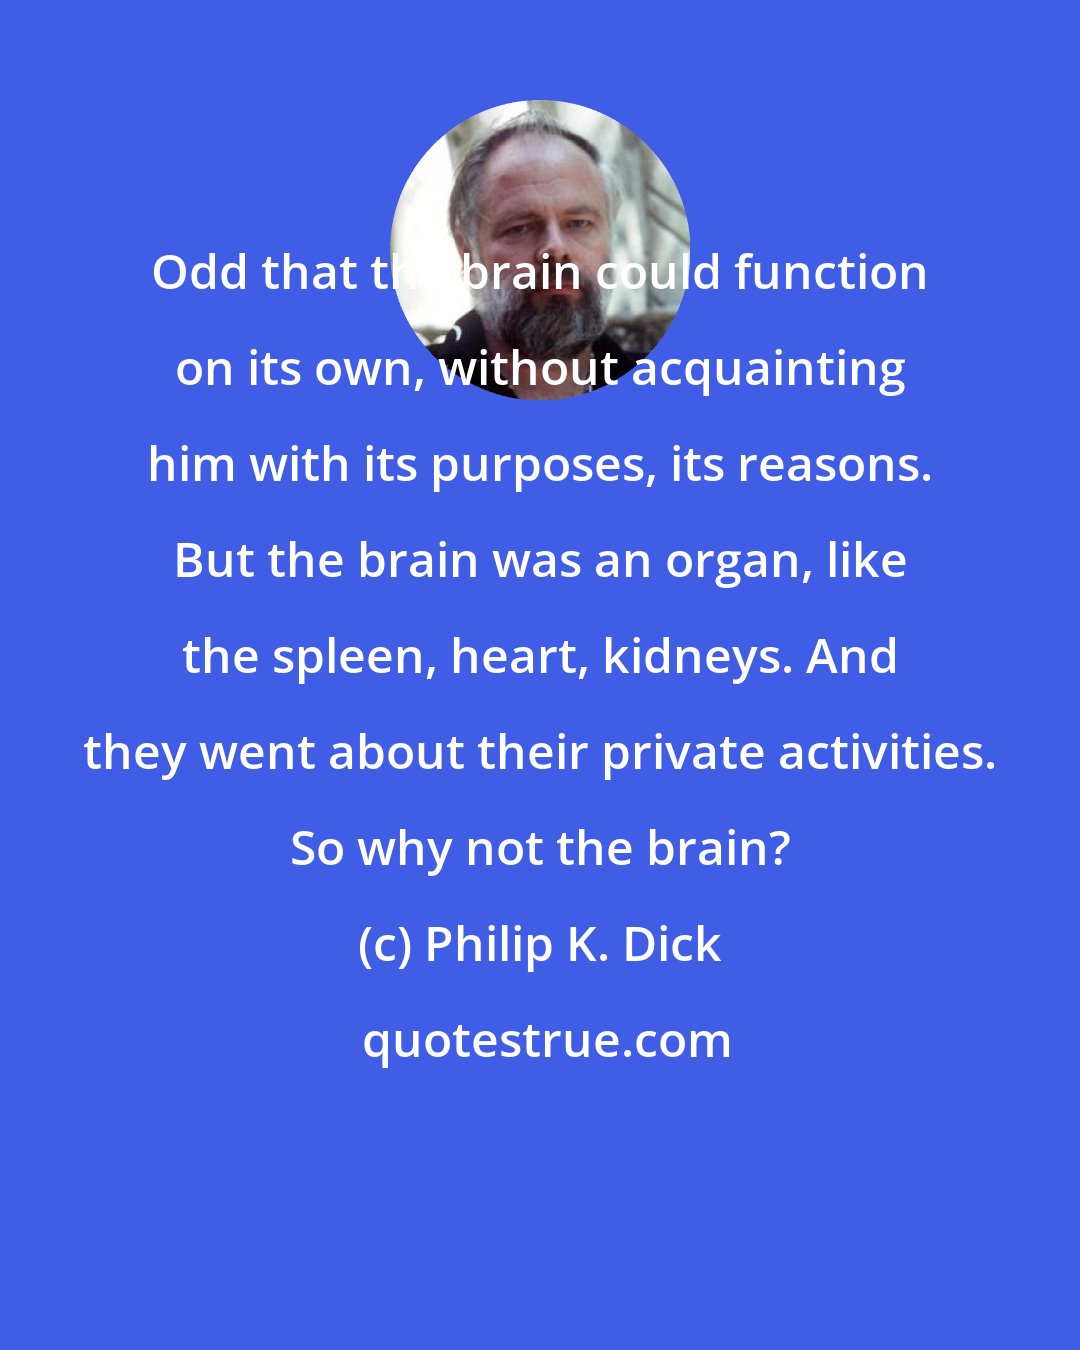 Philip K. Dick: Odd that the brain could function on its own, without acquainting him with its purposes, its reasons. But the brain was an organ, like the spleen, heart, kidneys. And they went about their private activities. So why not the brain?